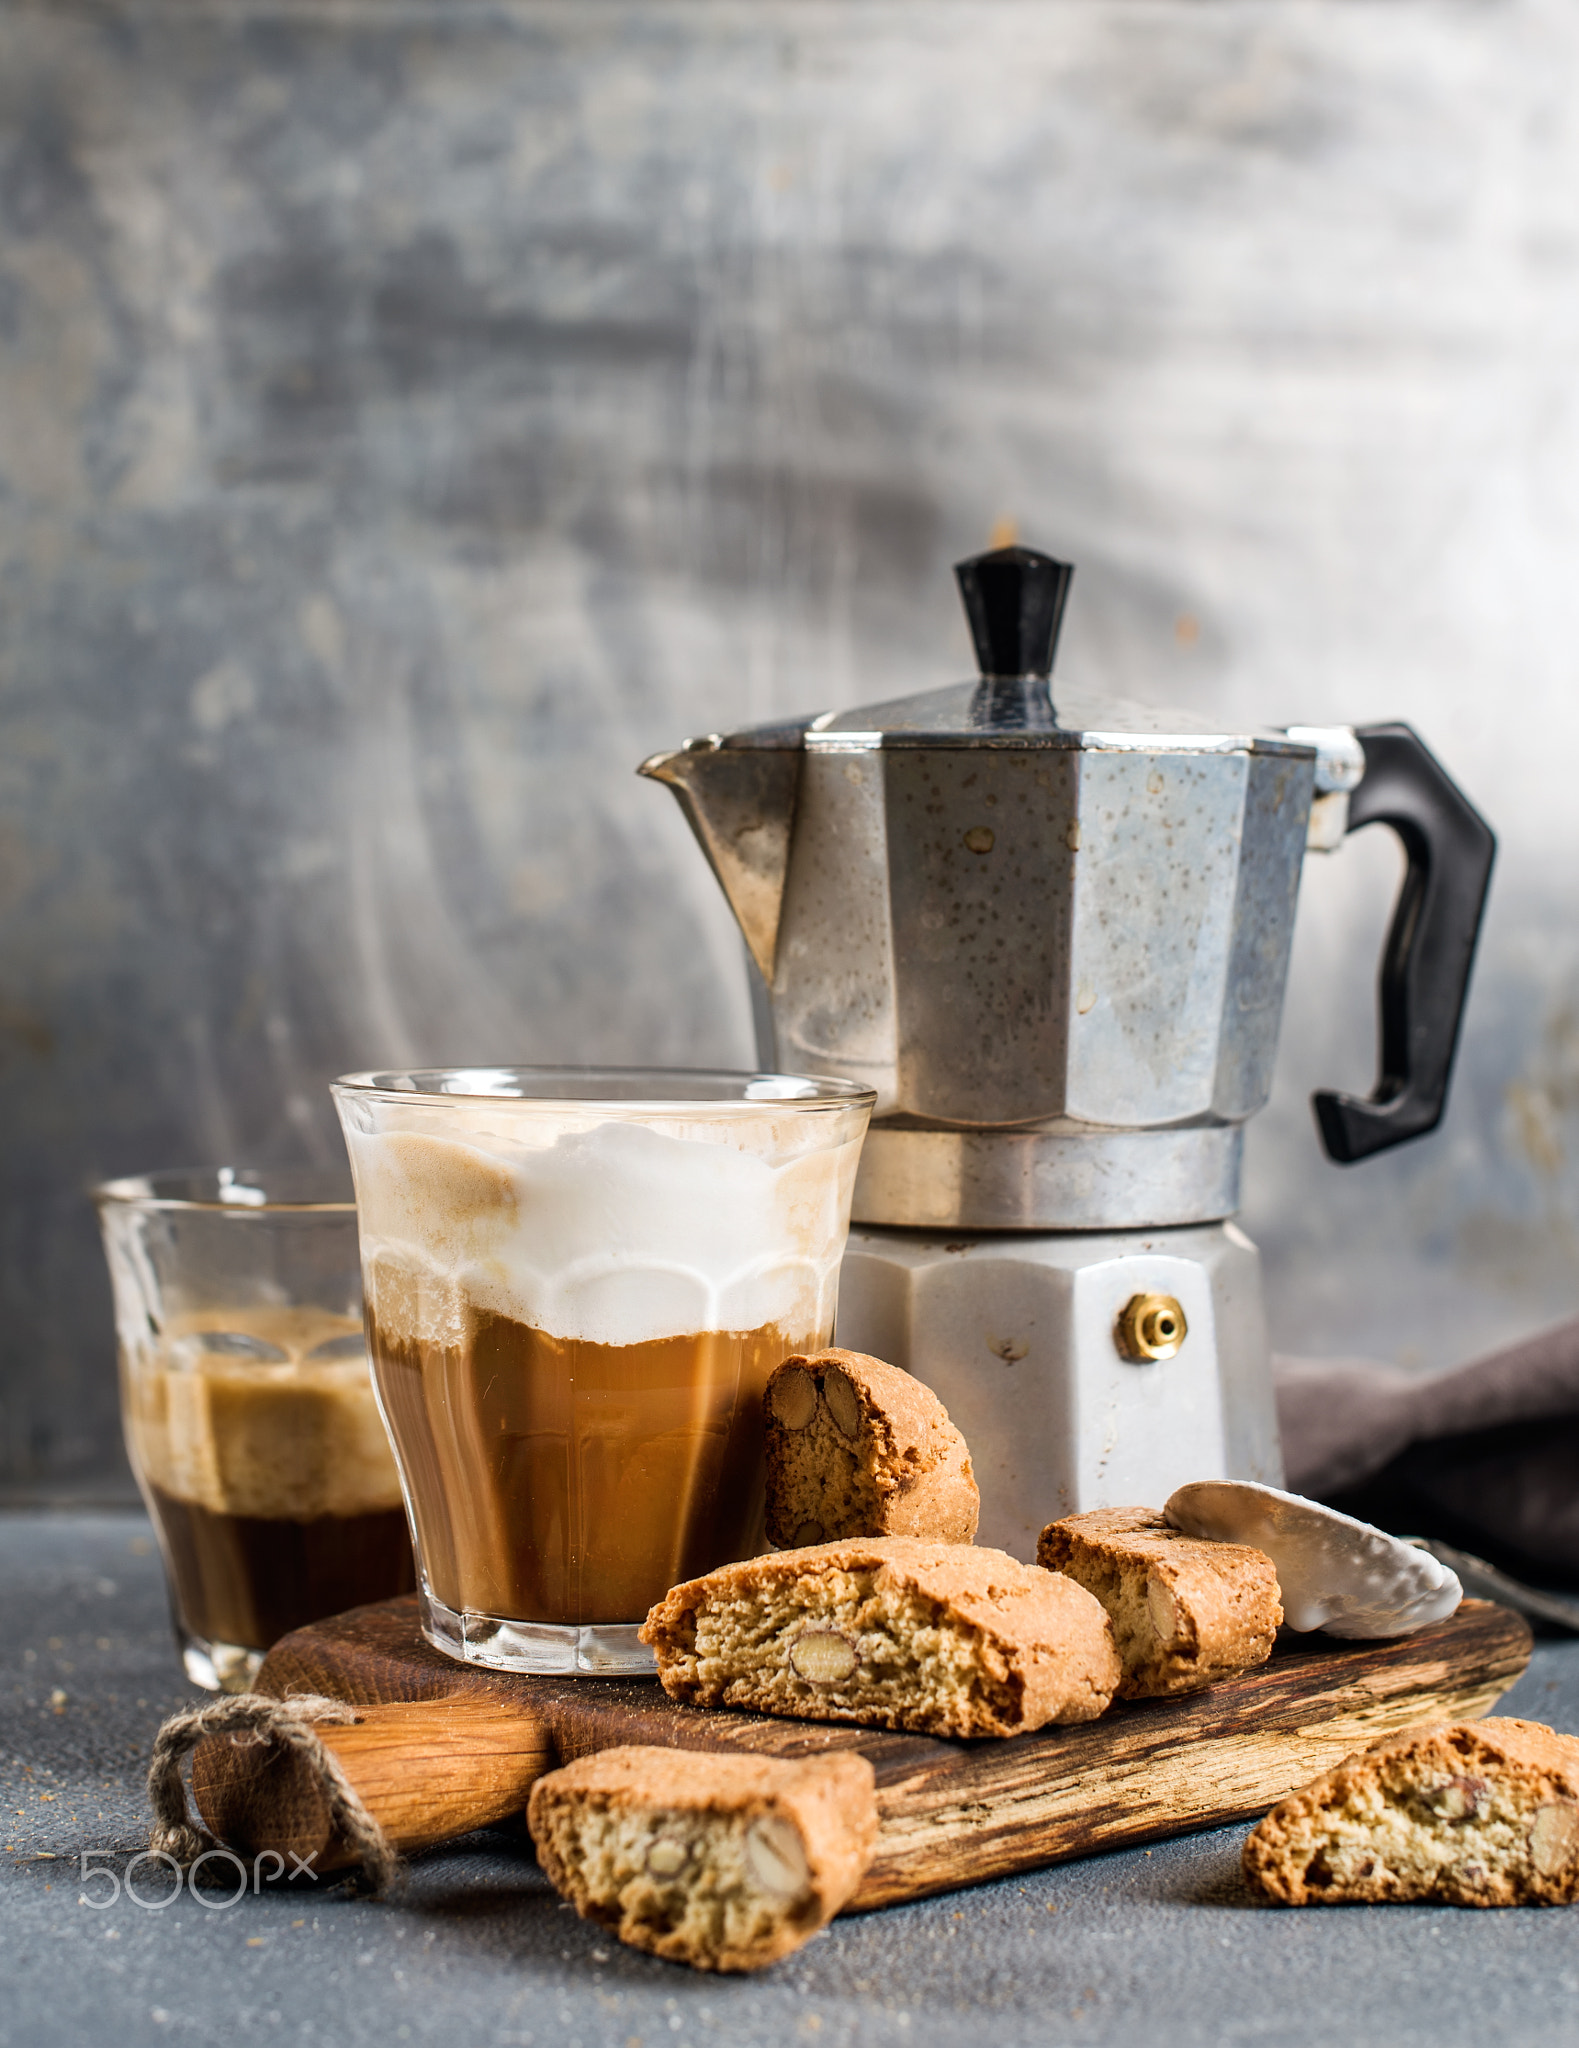 Glass of latte coffee on rustic wooden board, cantucci biscuits and steel Italian Moka pot, grey..